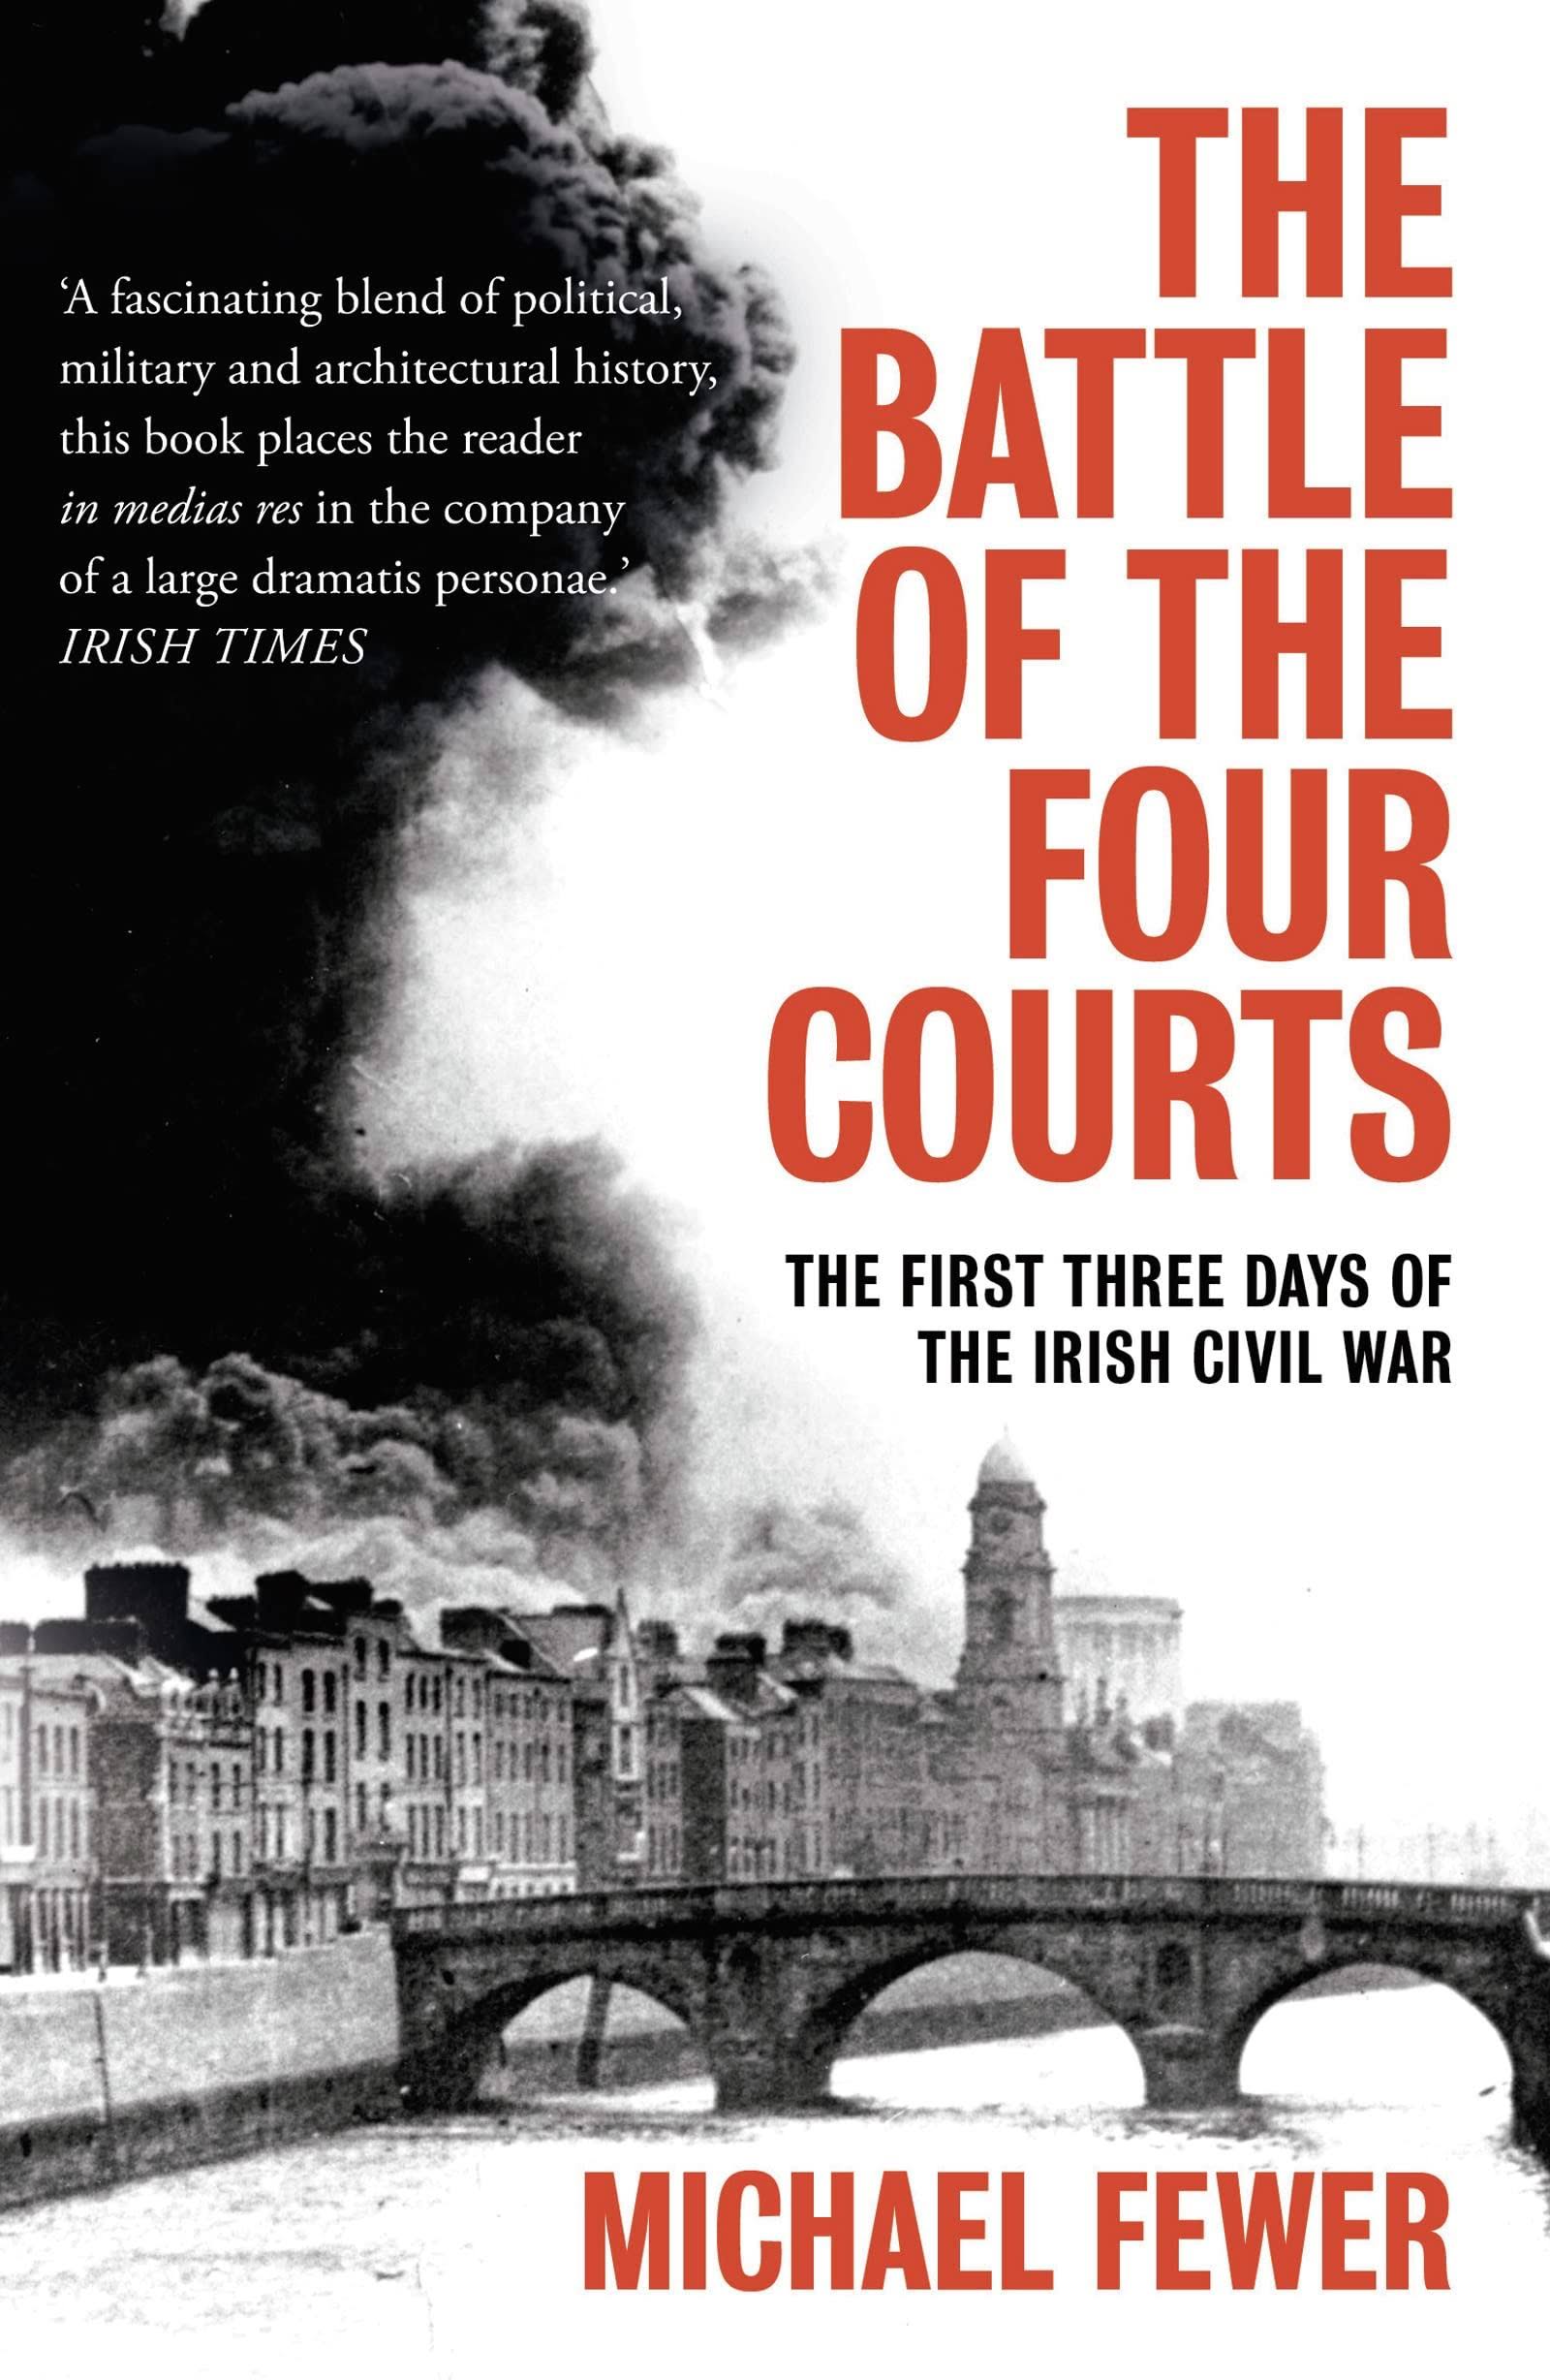 Battle of the Four Courts: The First Three Days of the Irish Civil War [Book]